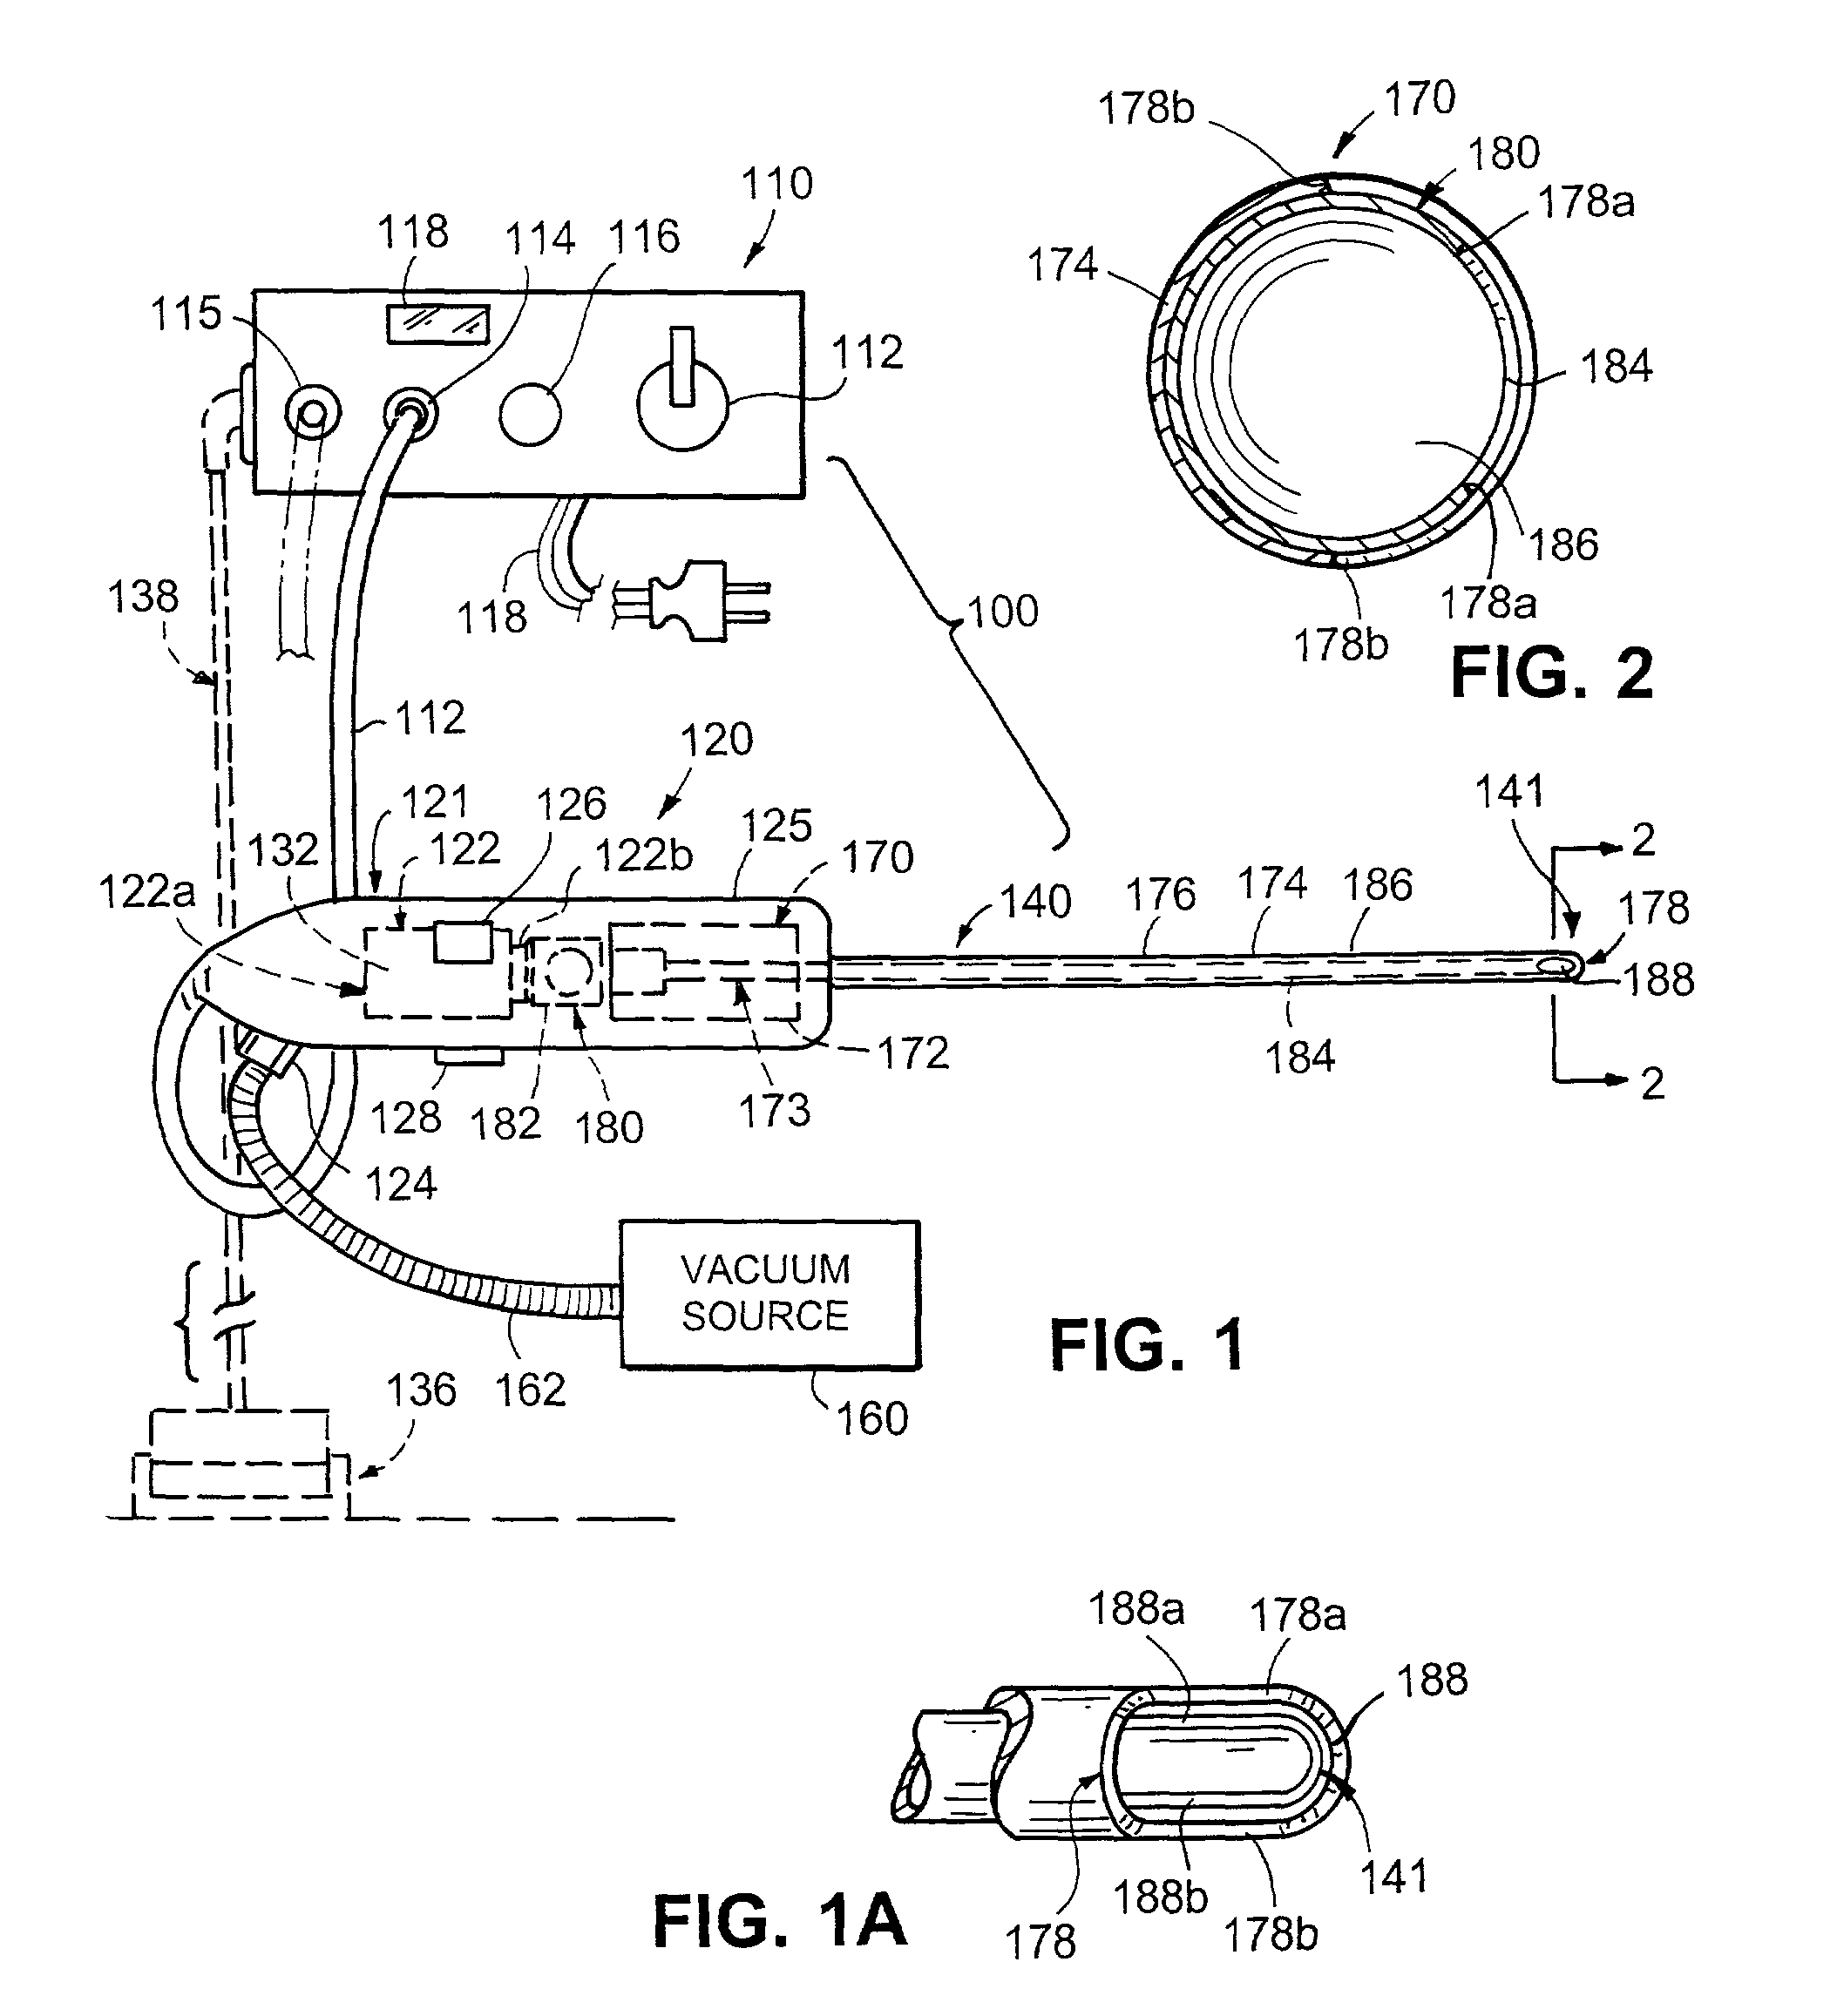 Methods and apparatus for removing veins